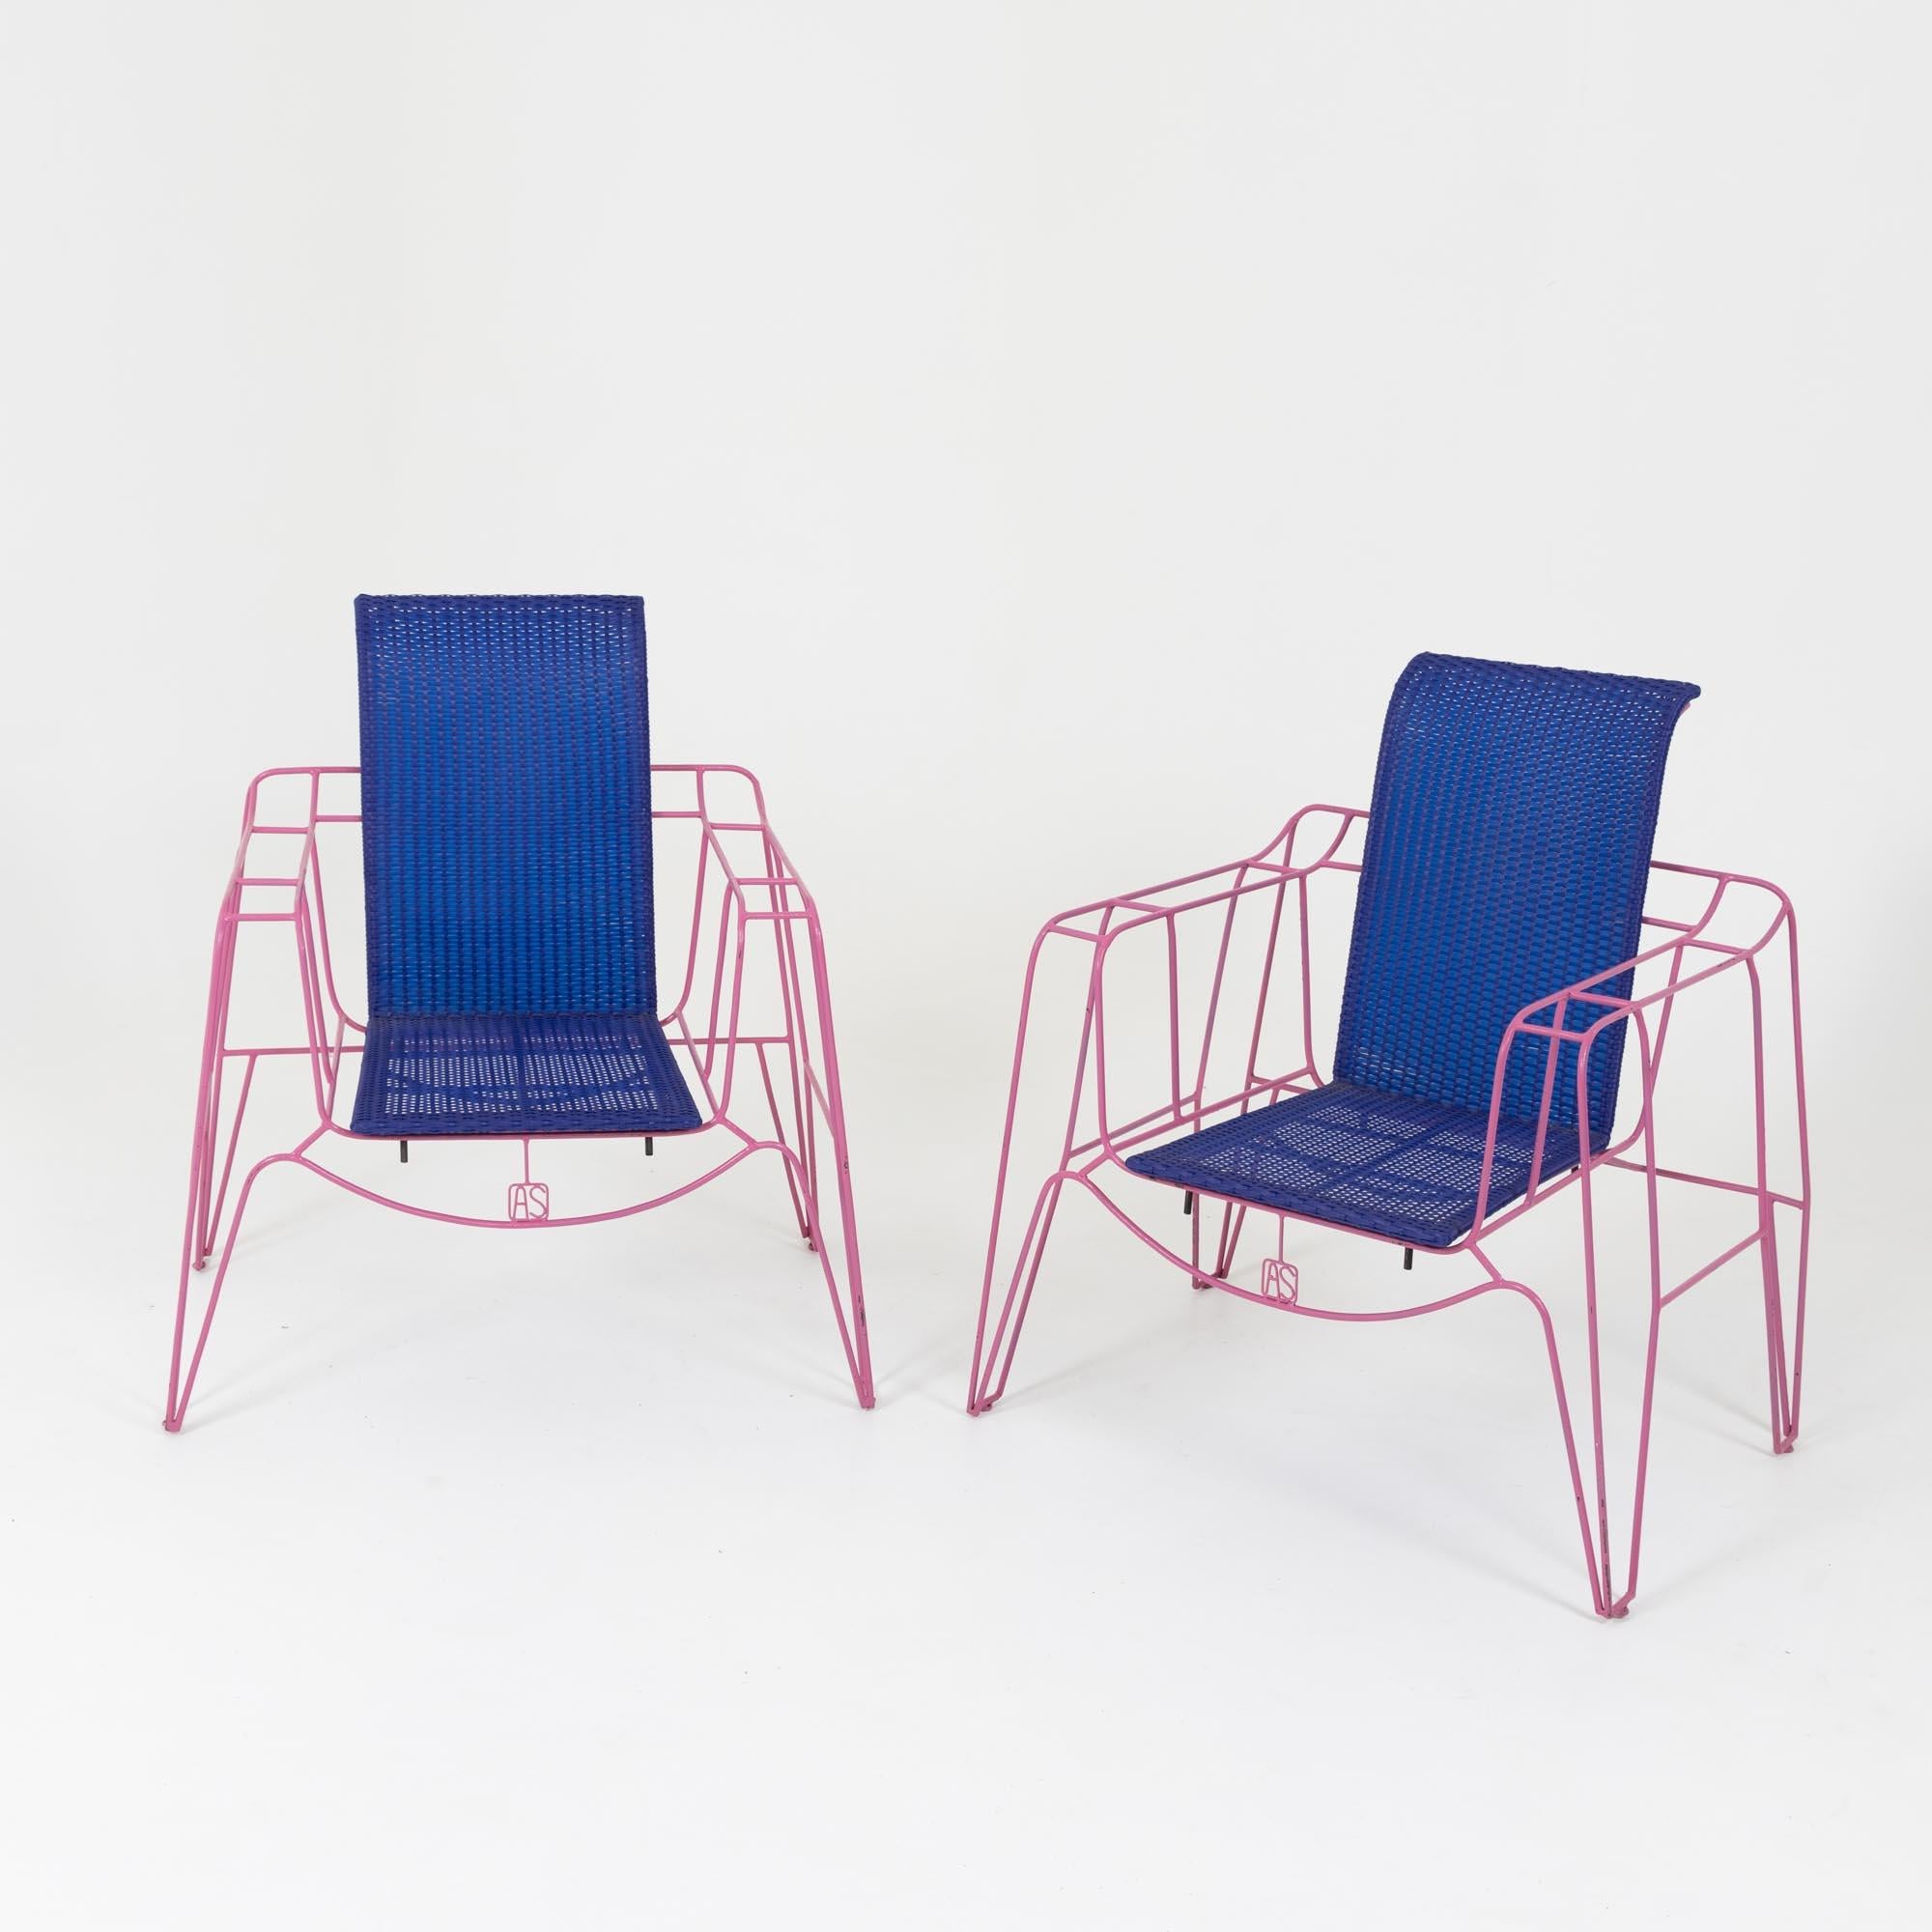 Pair of armchairs by Anacleto Spazzapan on pink painted metal frames with blue plastic rattan seats. The monogram AS is integrated on the front of the armchairs. As a designer, Anacleto Spazzapan (b. 1943) considers himself in the service of